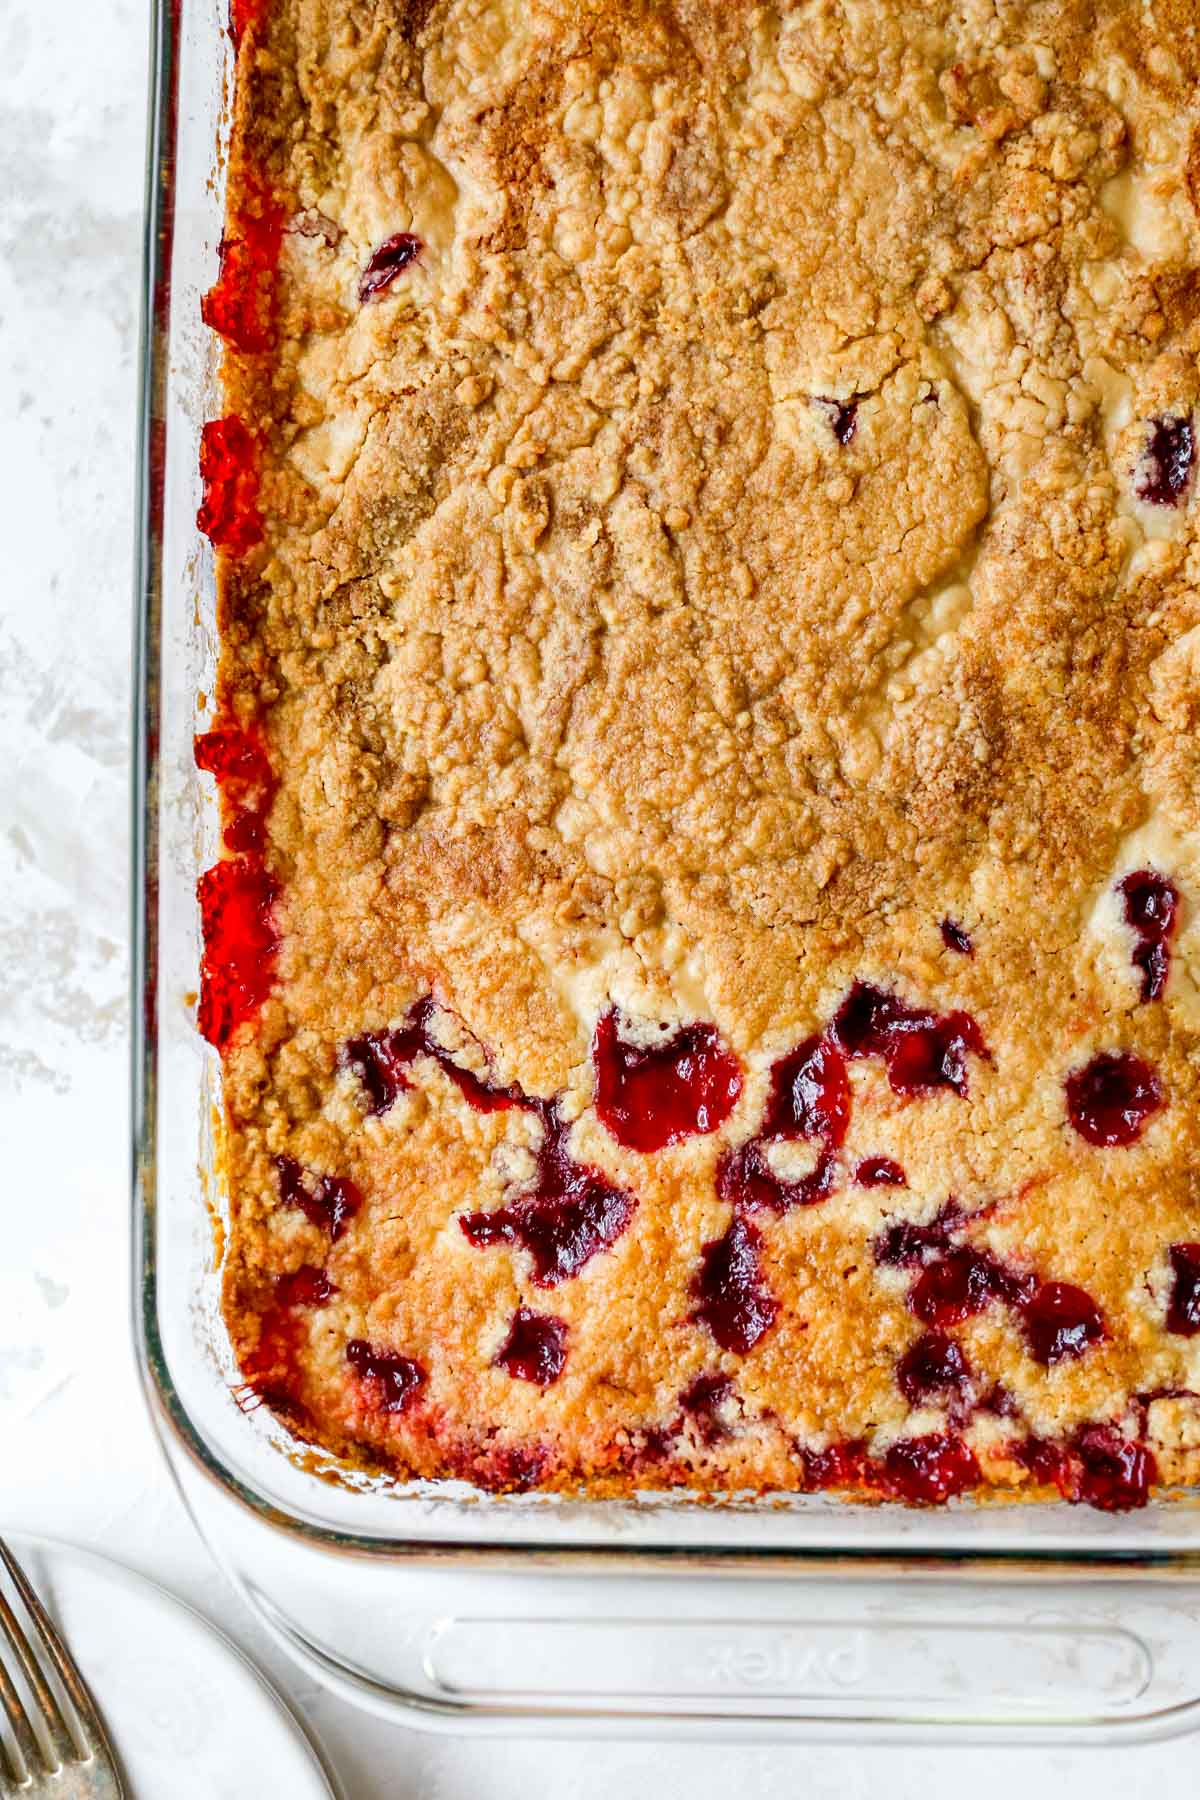 Baked cherry cobbler in a glass baking dish.